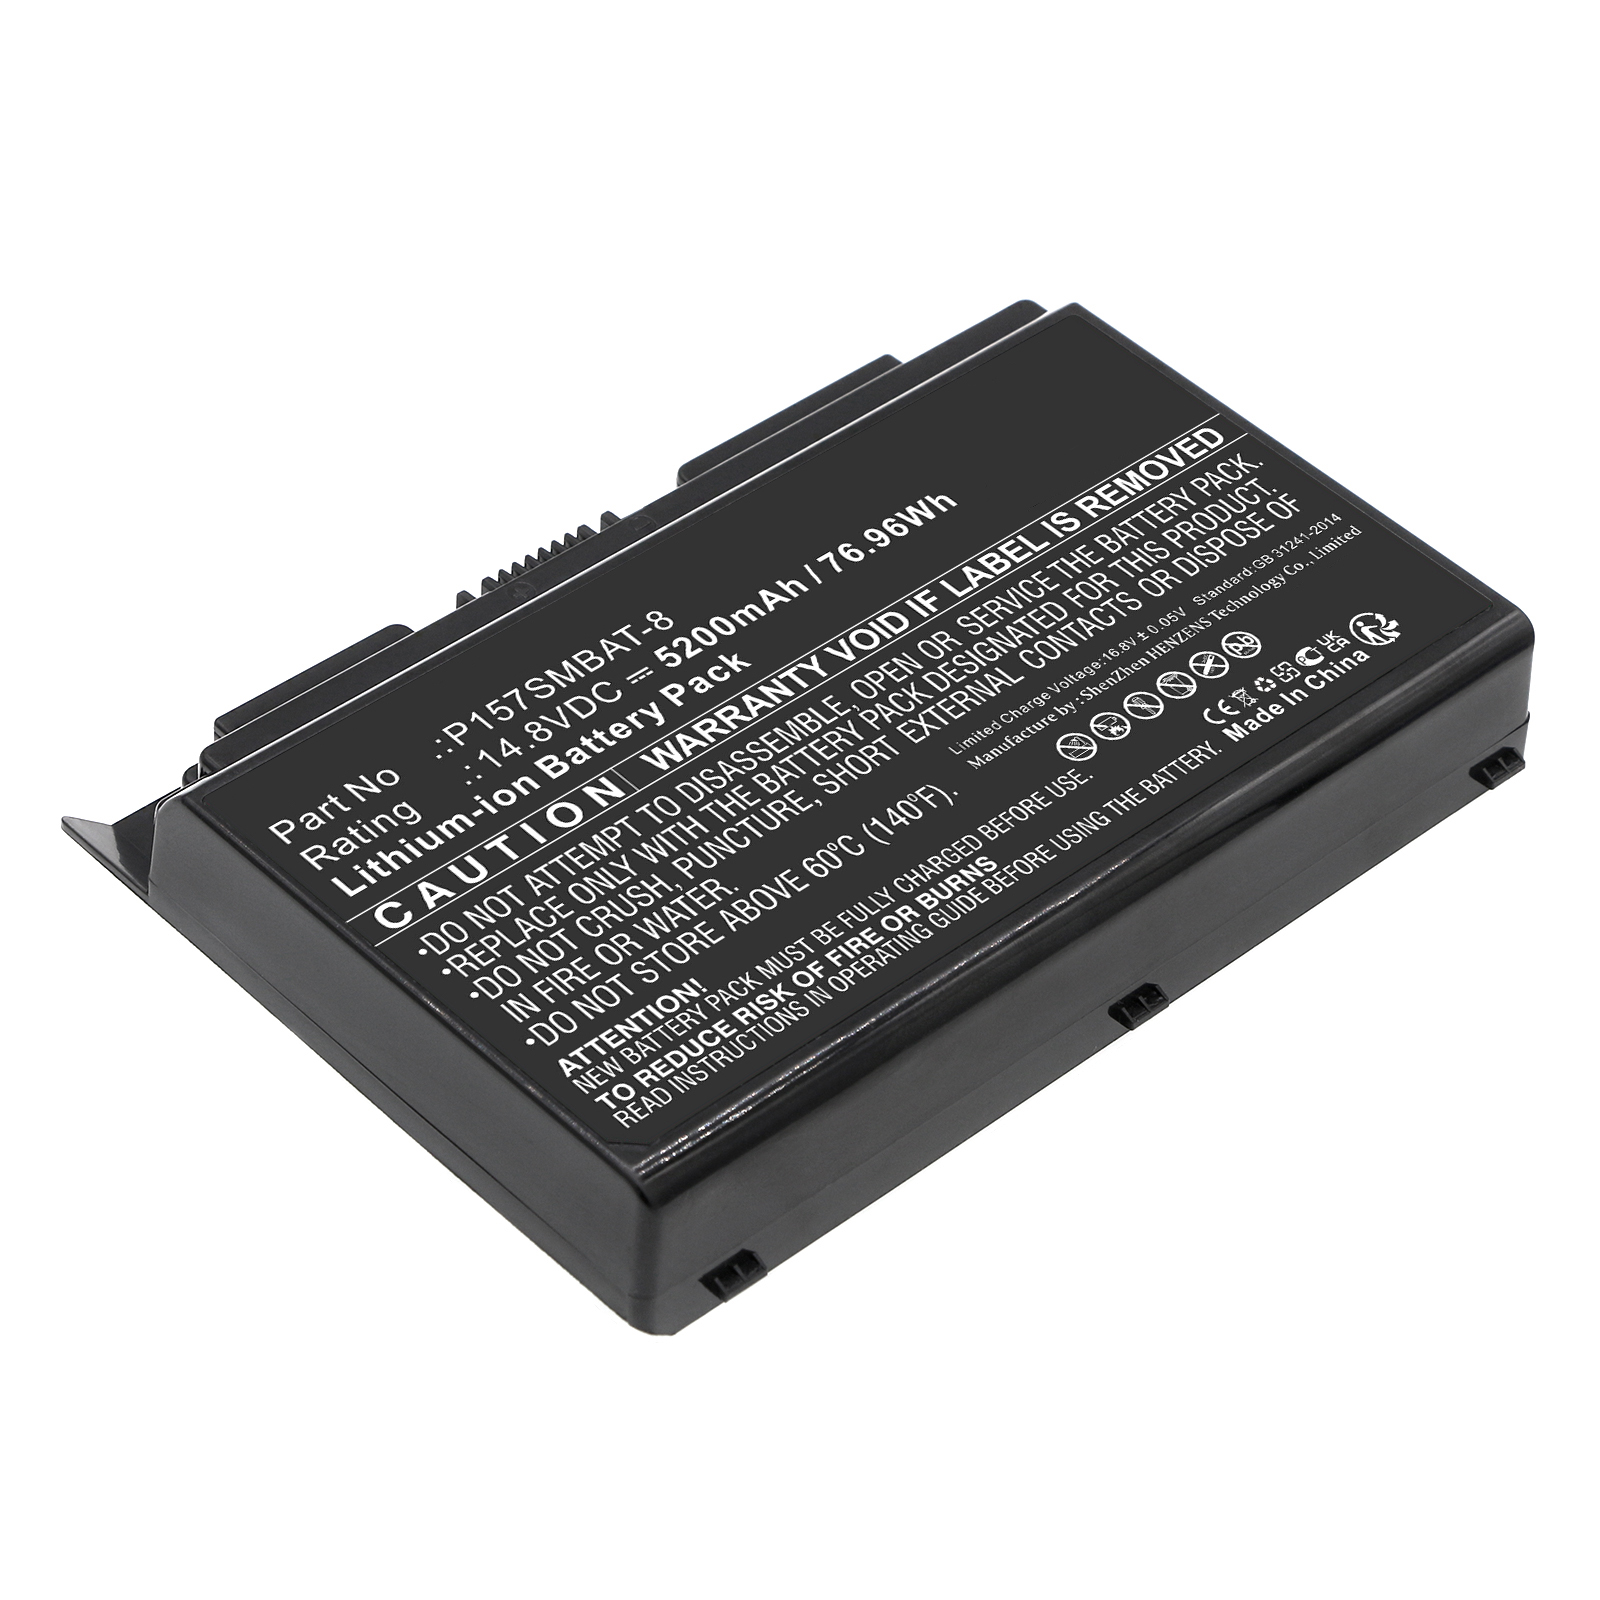 Synergy Digital Laptop Battery, Compatible with Clevo 6-87-P157S-4272 Laptop Battery (Li-ion, 14.8V, 5200mAh)